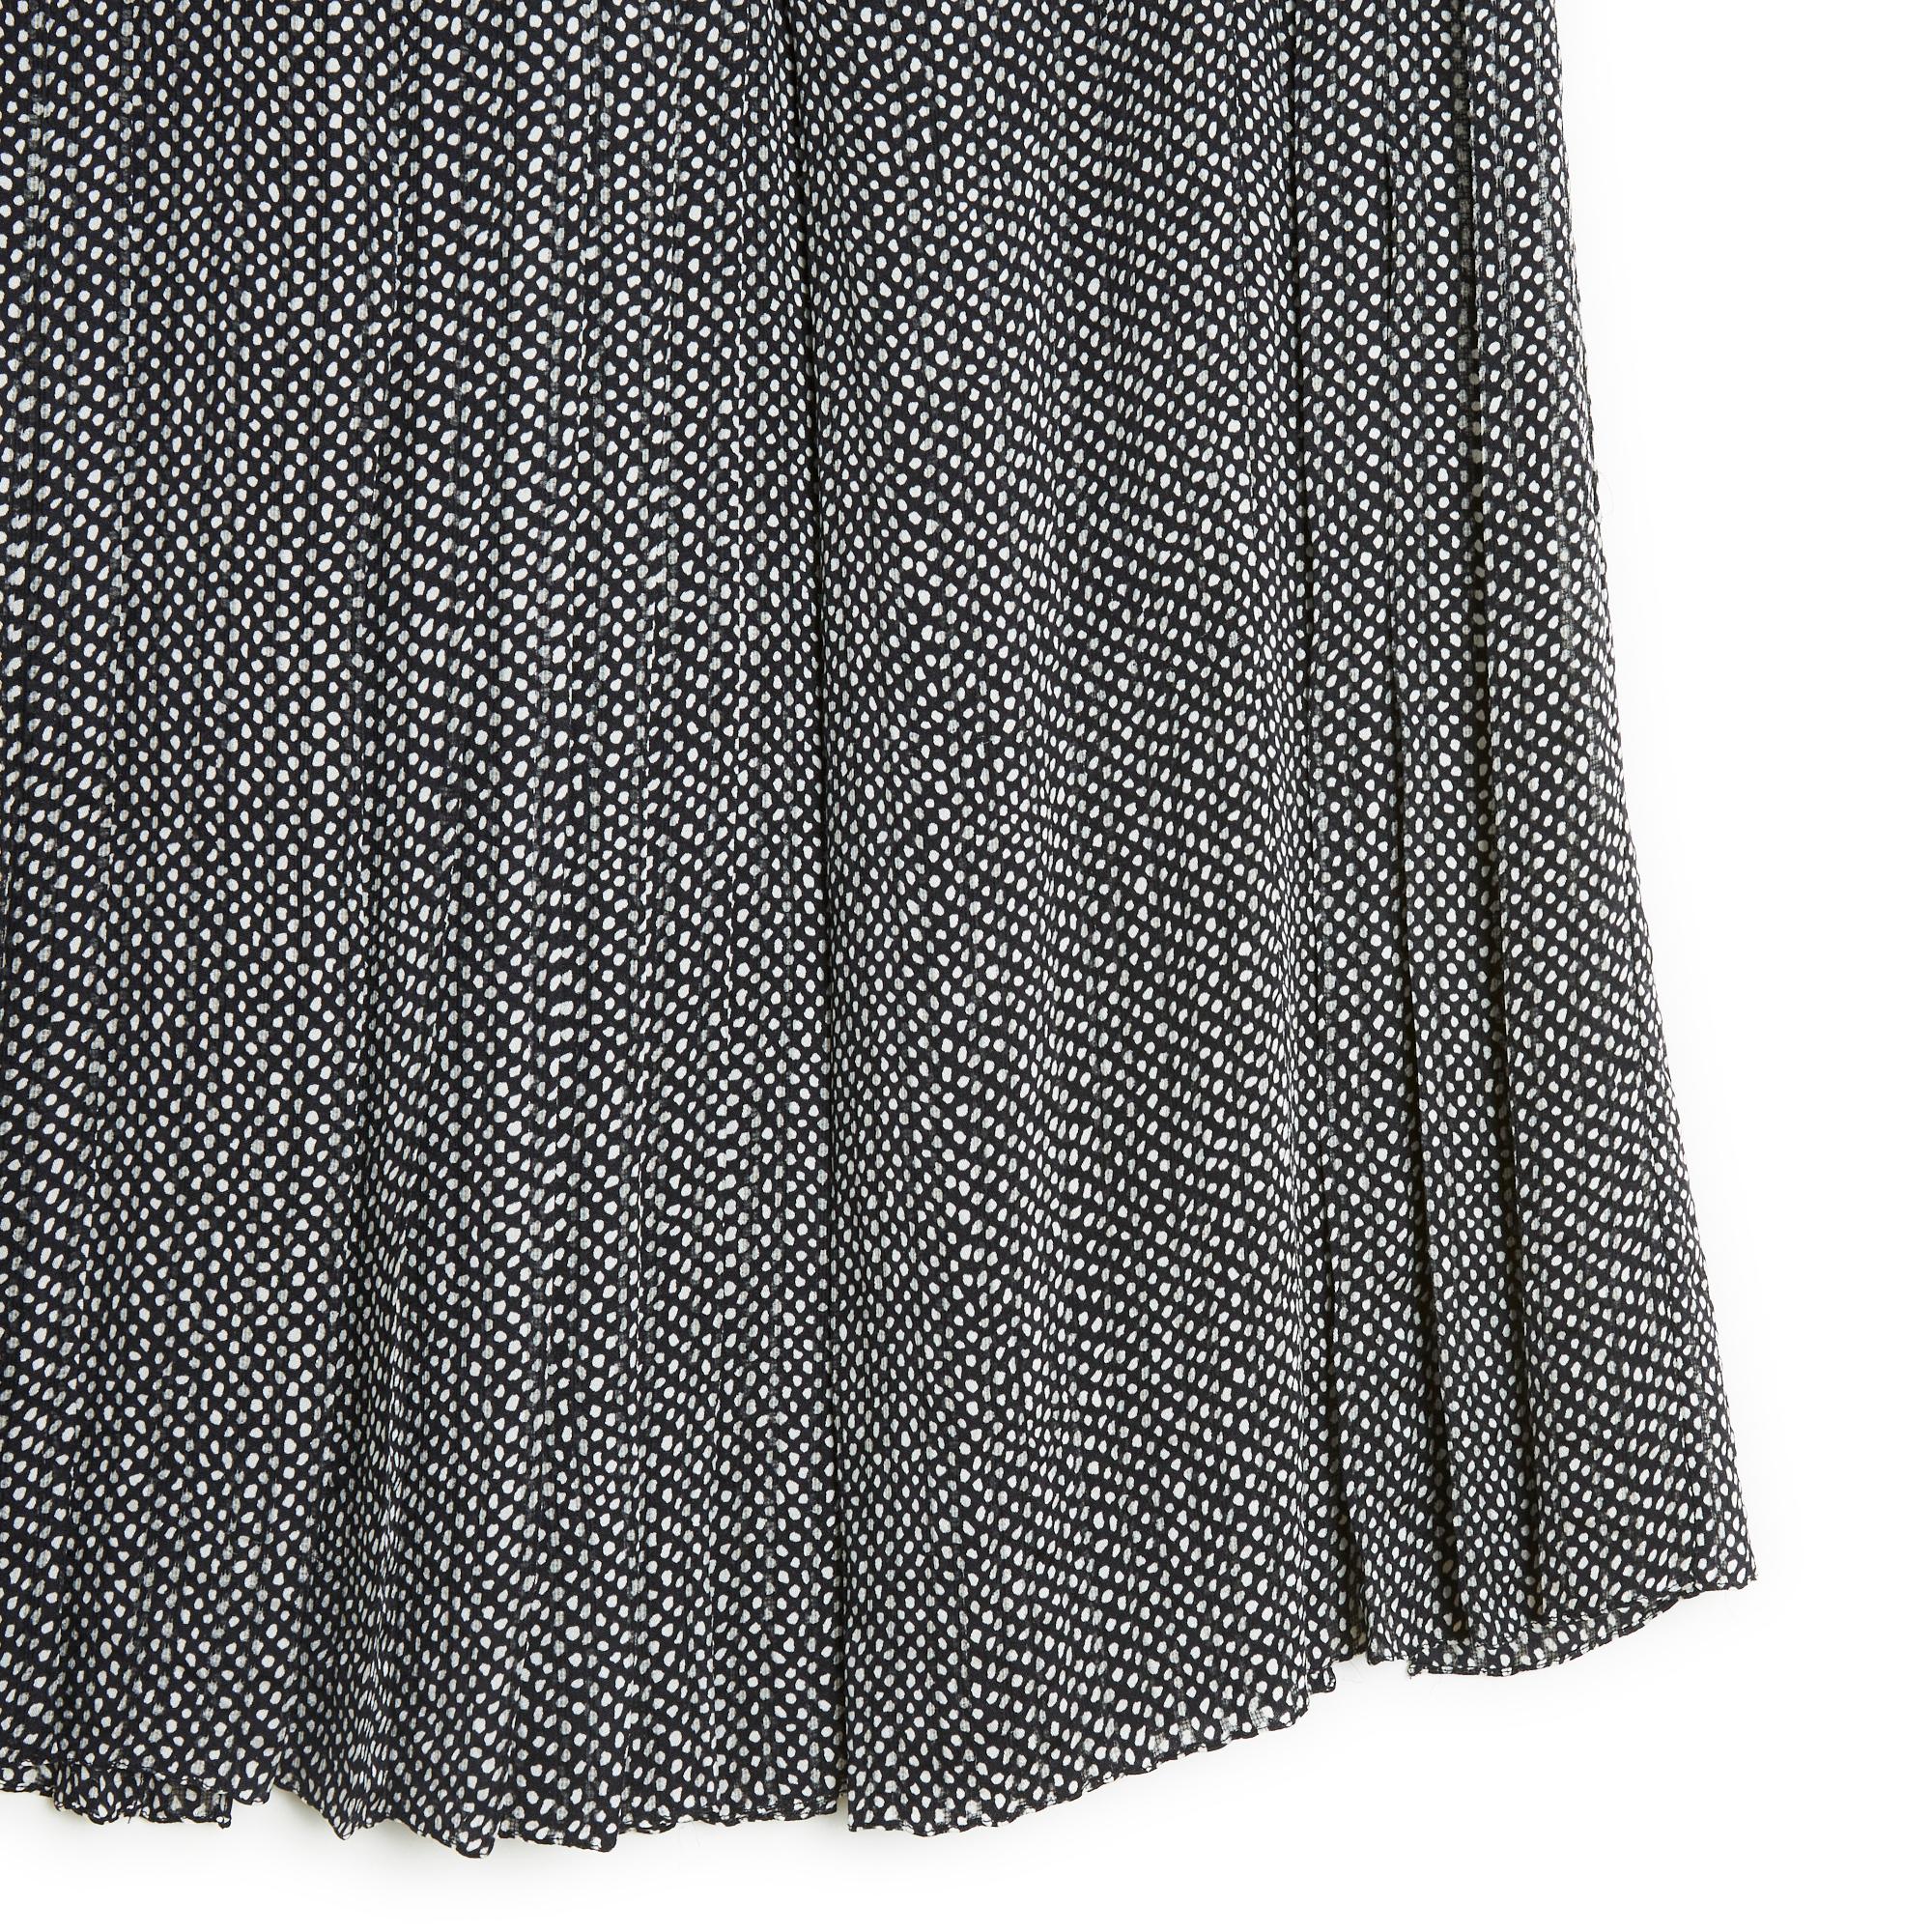 Céline skirt from Cruise 2011 collection by Phoebe Philo, high waist, in black silk chiffon with irregular white polka dots, alternating pleats at the front and large hollow pleats at the back (smoother at the back than at the front), closing with a